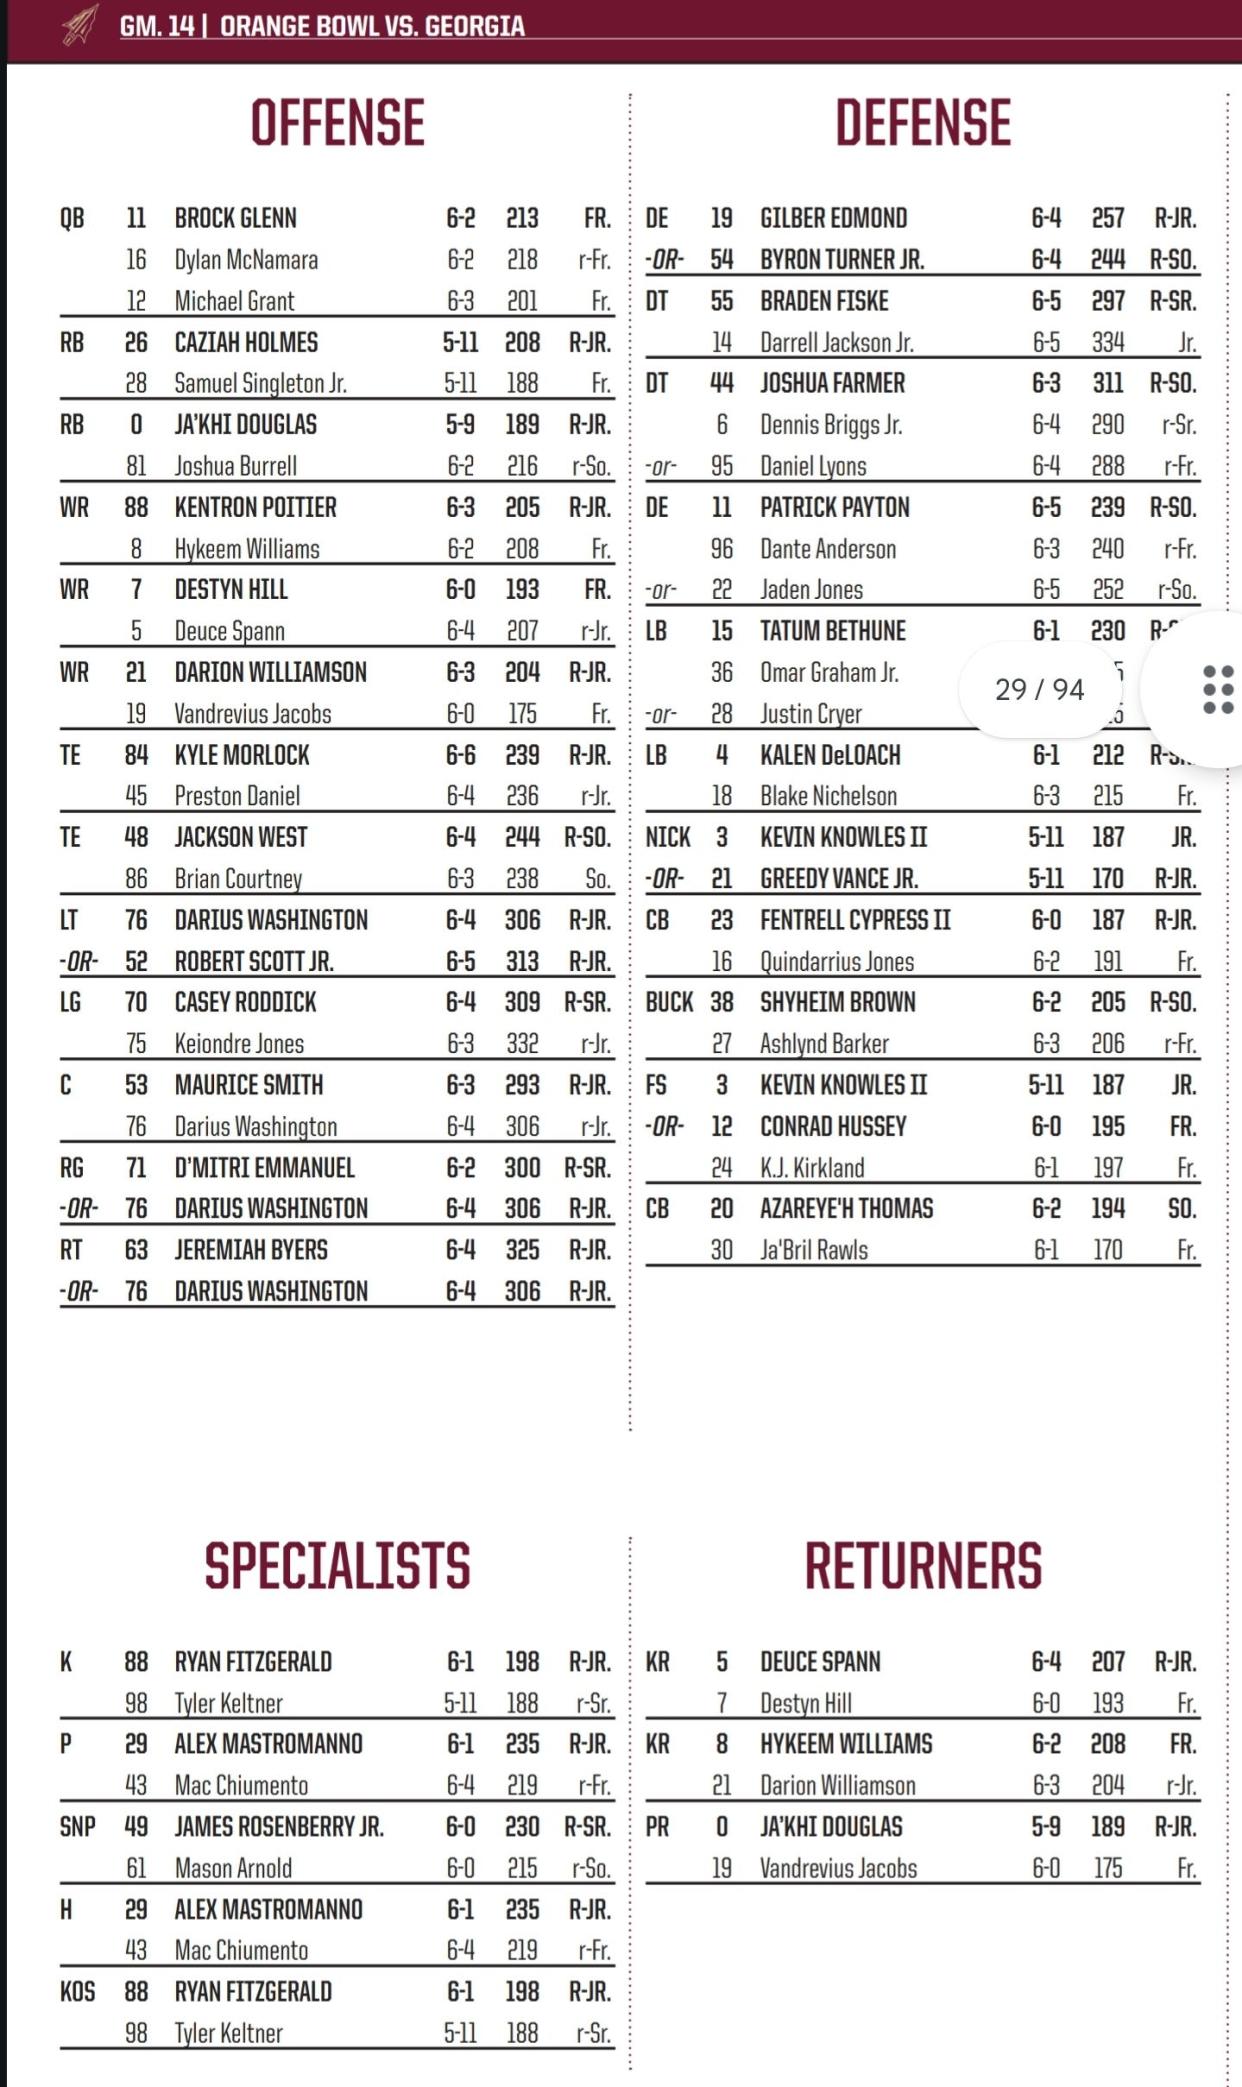 Here are the most notable changes on FSU football's Orange Bowl depth chart